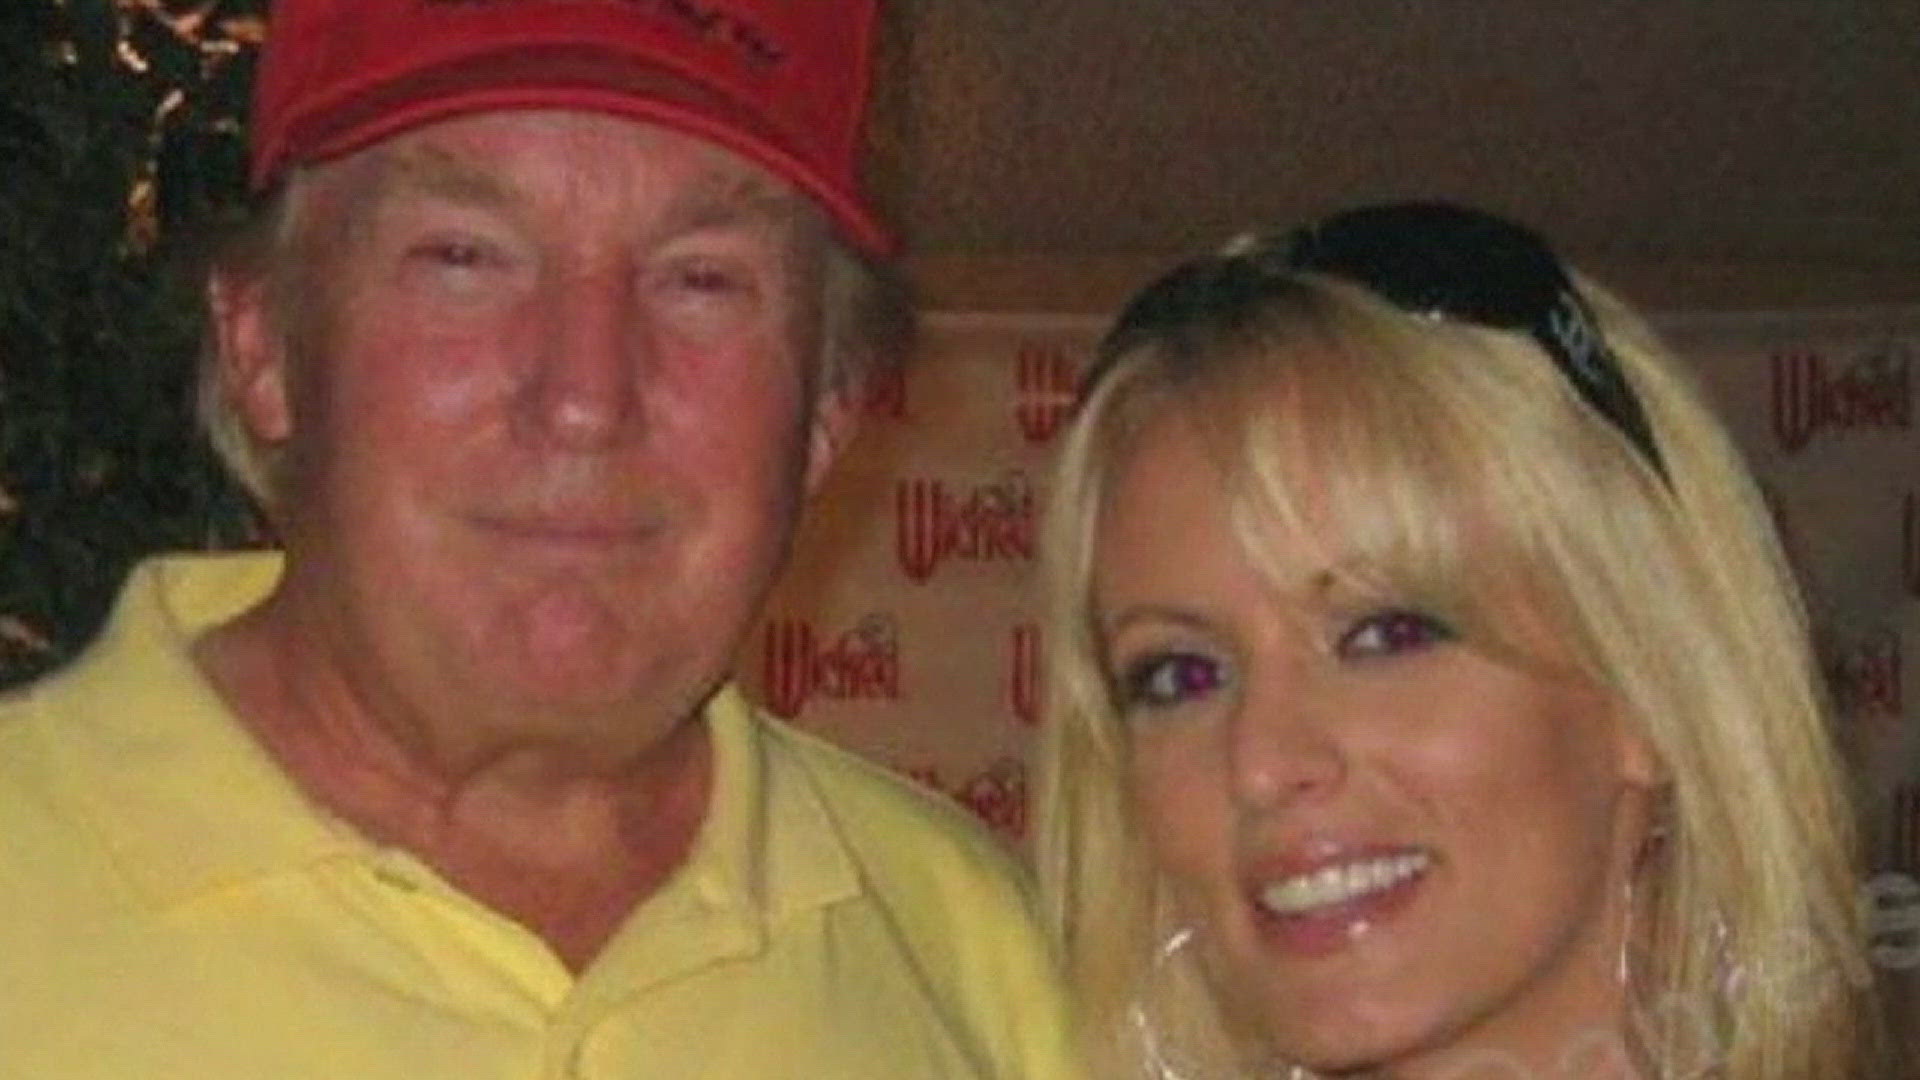 Stormy Daniels took to the stand Wednesday and conveyed dramatic details about her encounter with Trump in 2006. She will return to court on Thursday.